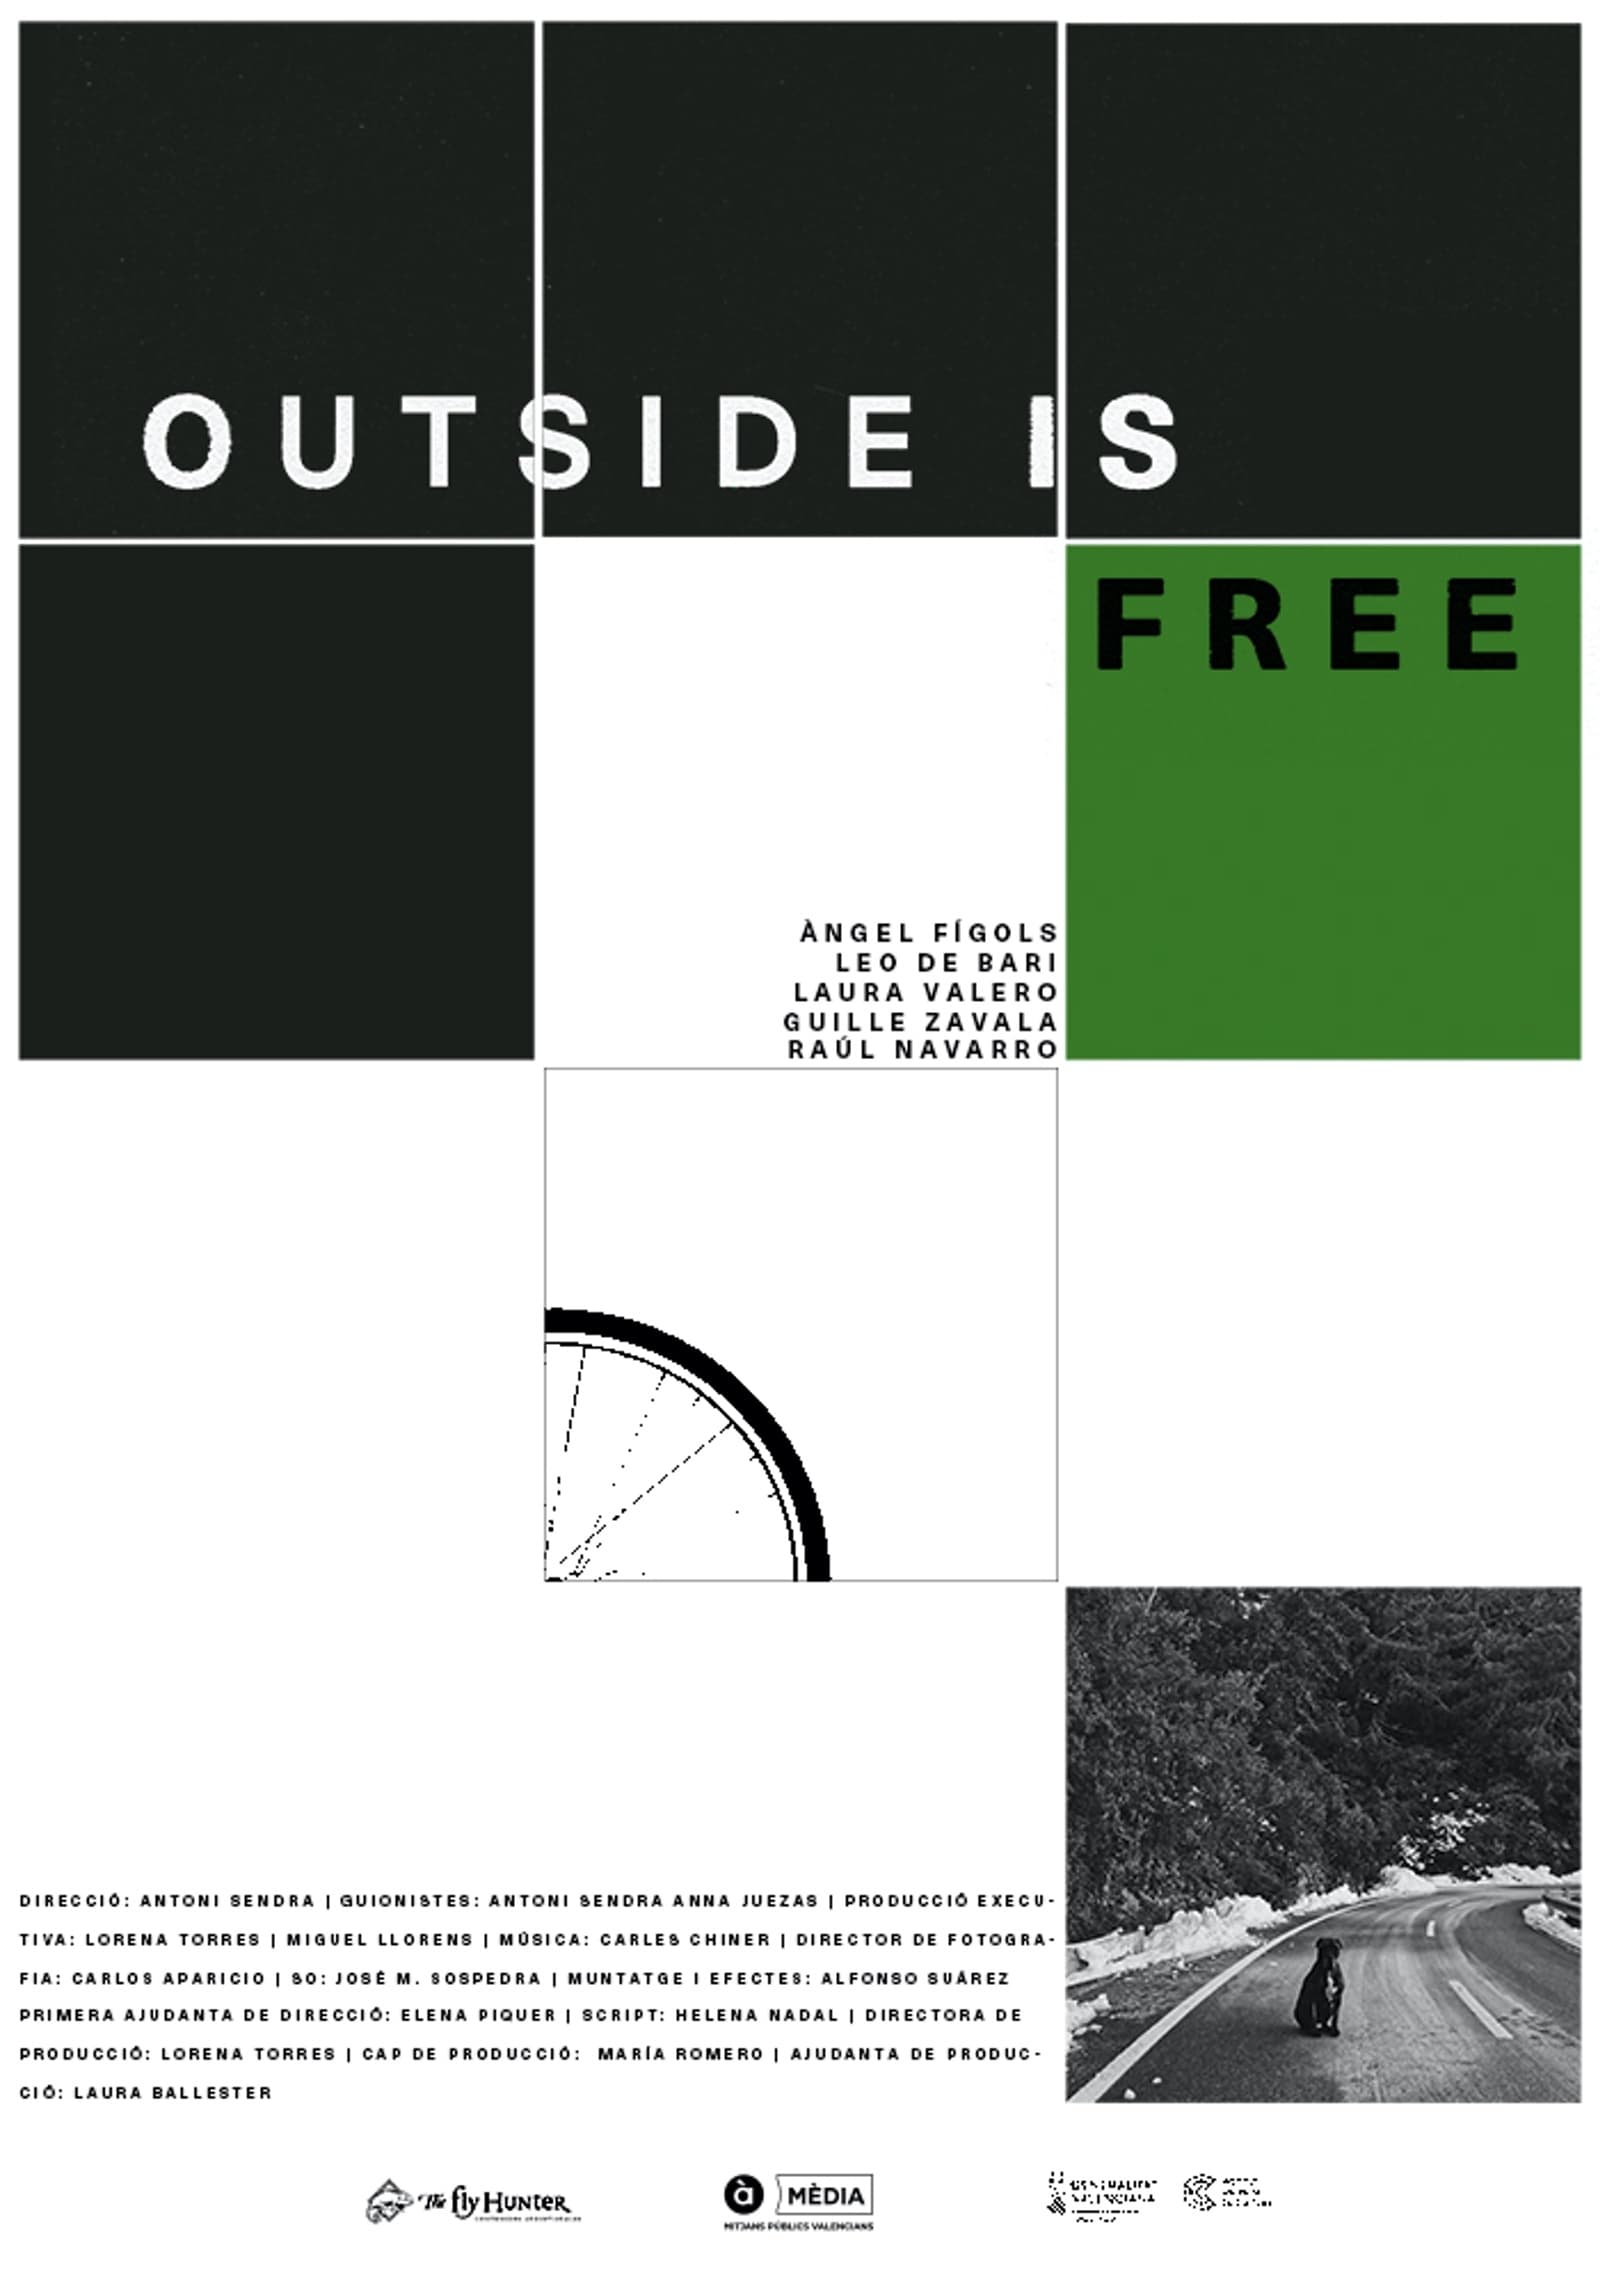 Outside is free